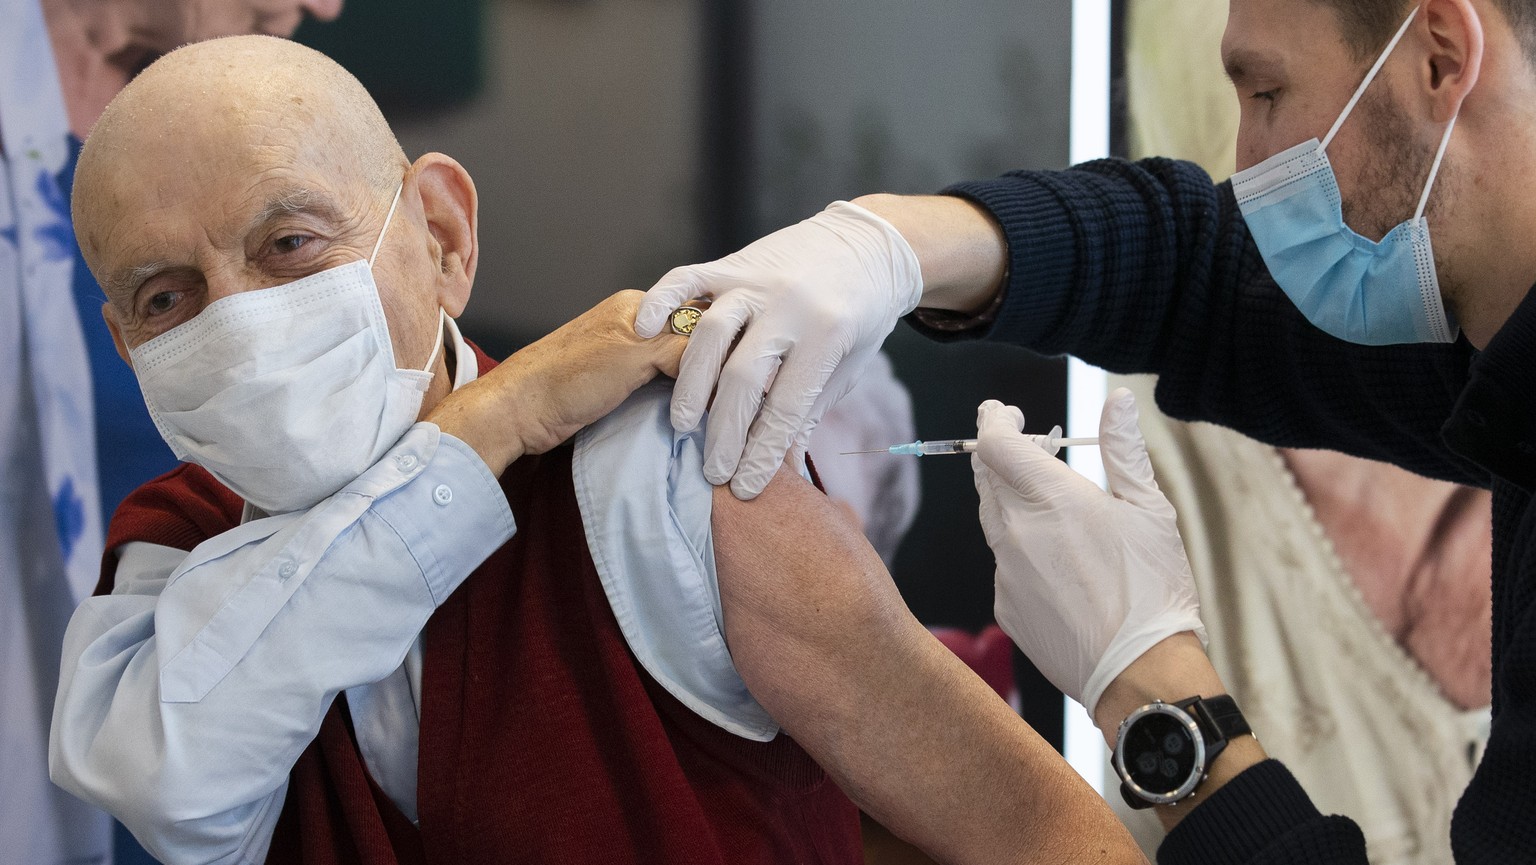 Fabien, nurse of IMAD, vaccinates Leon T. (alias name), 80, as he becomes the first person in Geneva to receive the Pfizer/BioNtech COVID-19 vaccine at the IEPA (Building with supervision for the elde ...